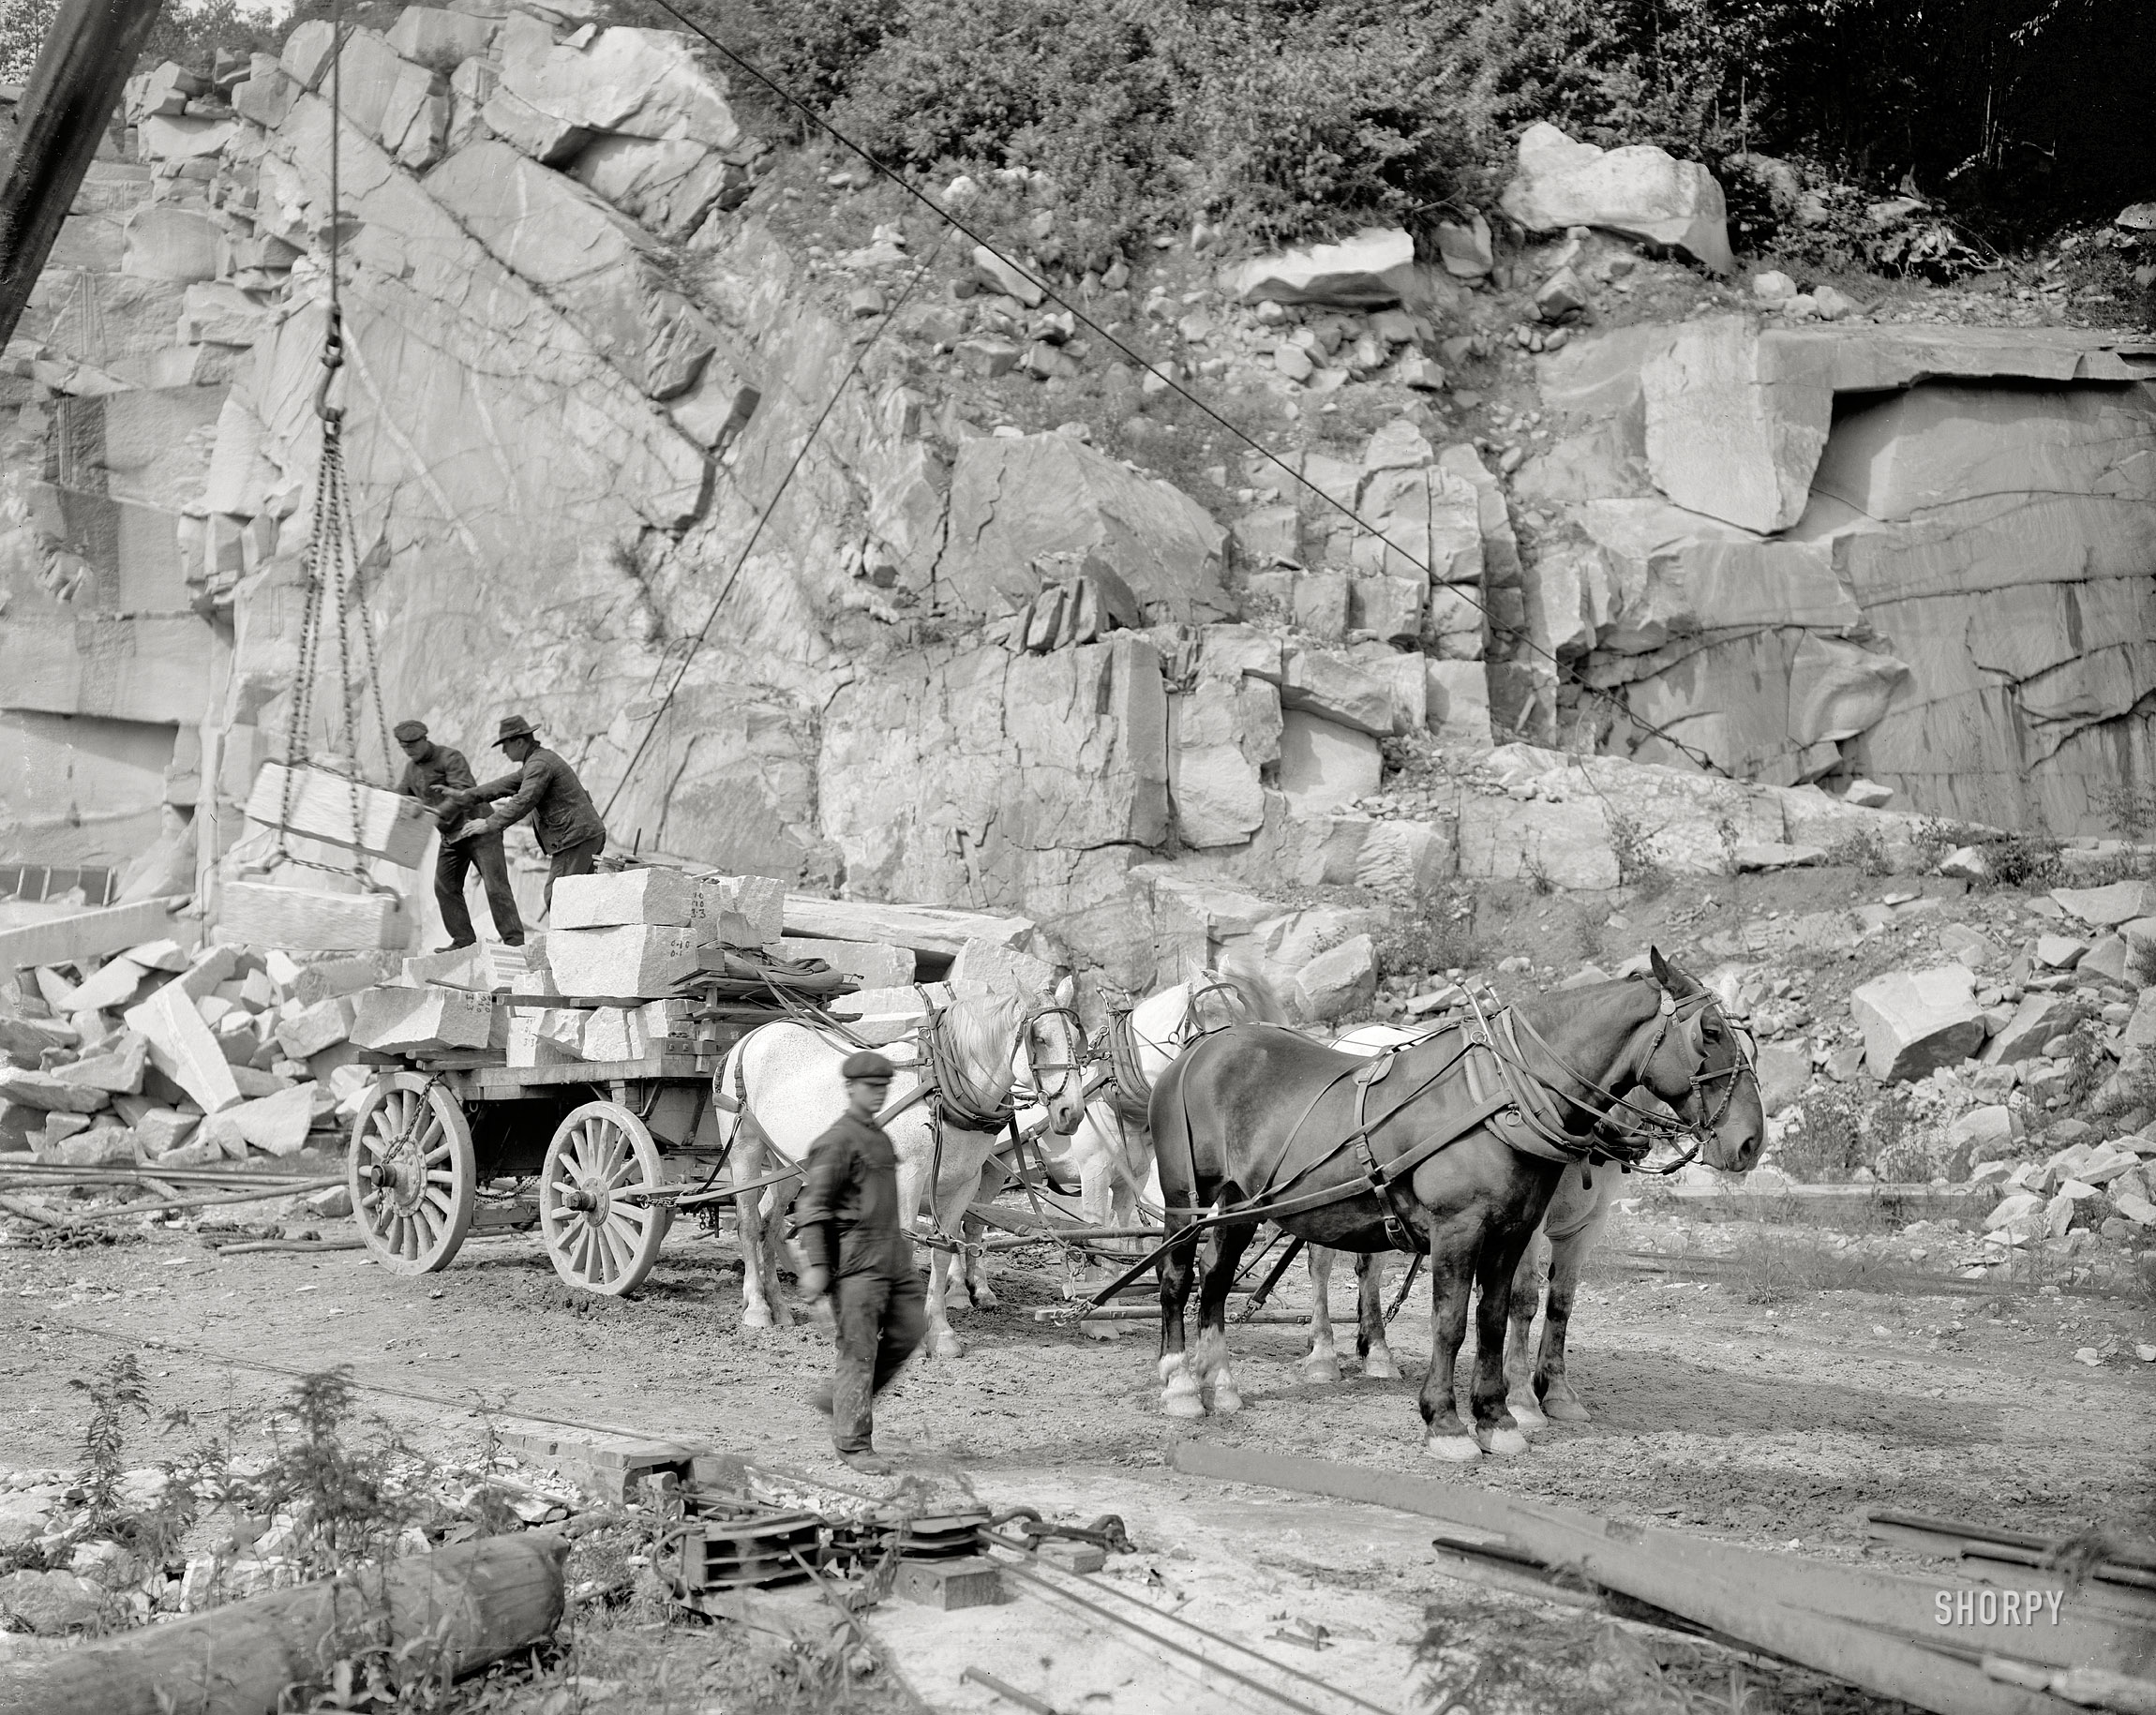 Concord, New Hampshire, circa 1908. "Loading at a New England granite quarry." 8x10 inch glass negative, Detroit Publishing Co. View full size.